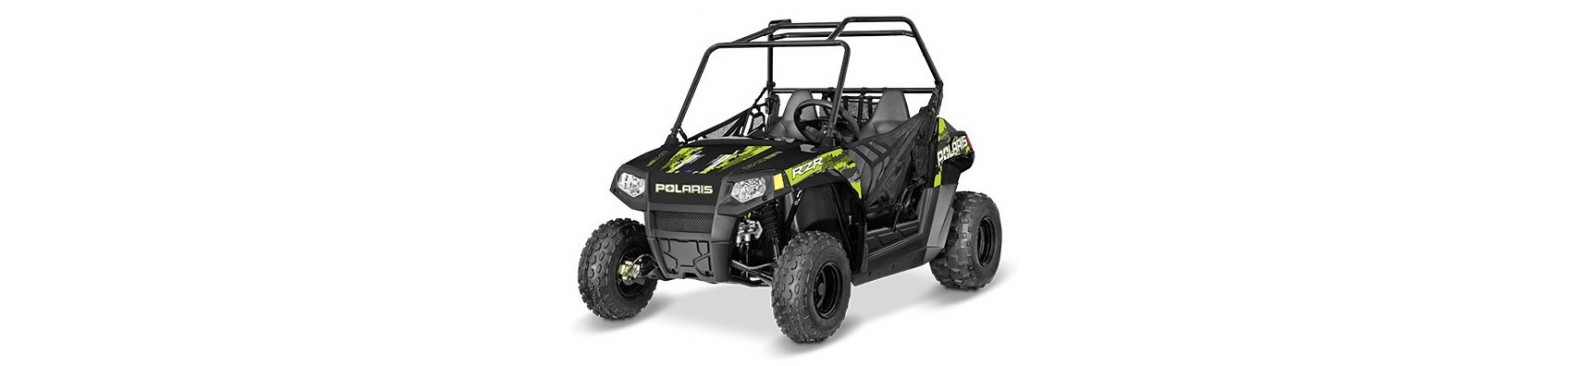 Performance Upgrade and Aftermarket parts for the Polaris RZR 170